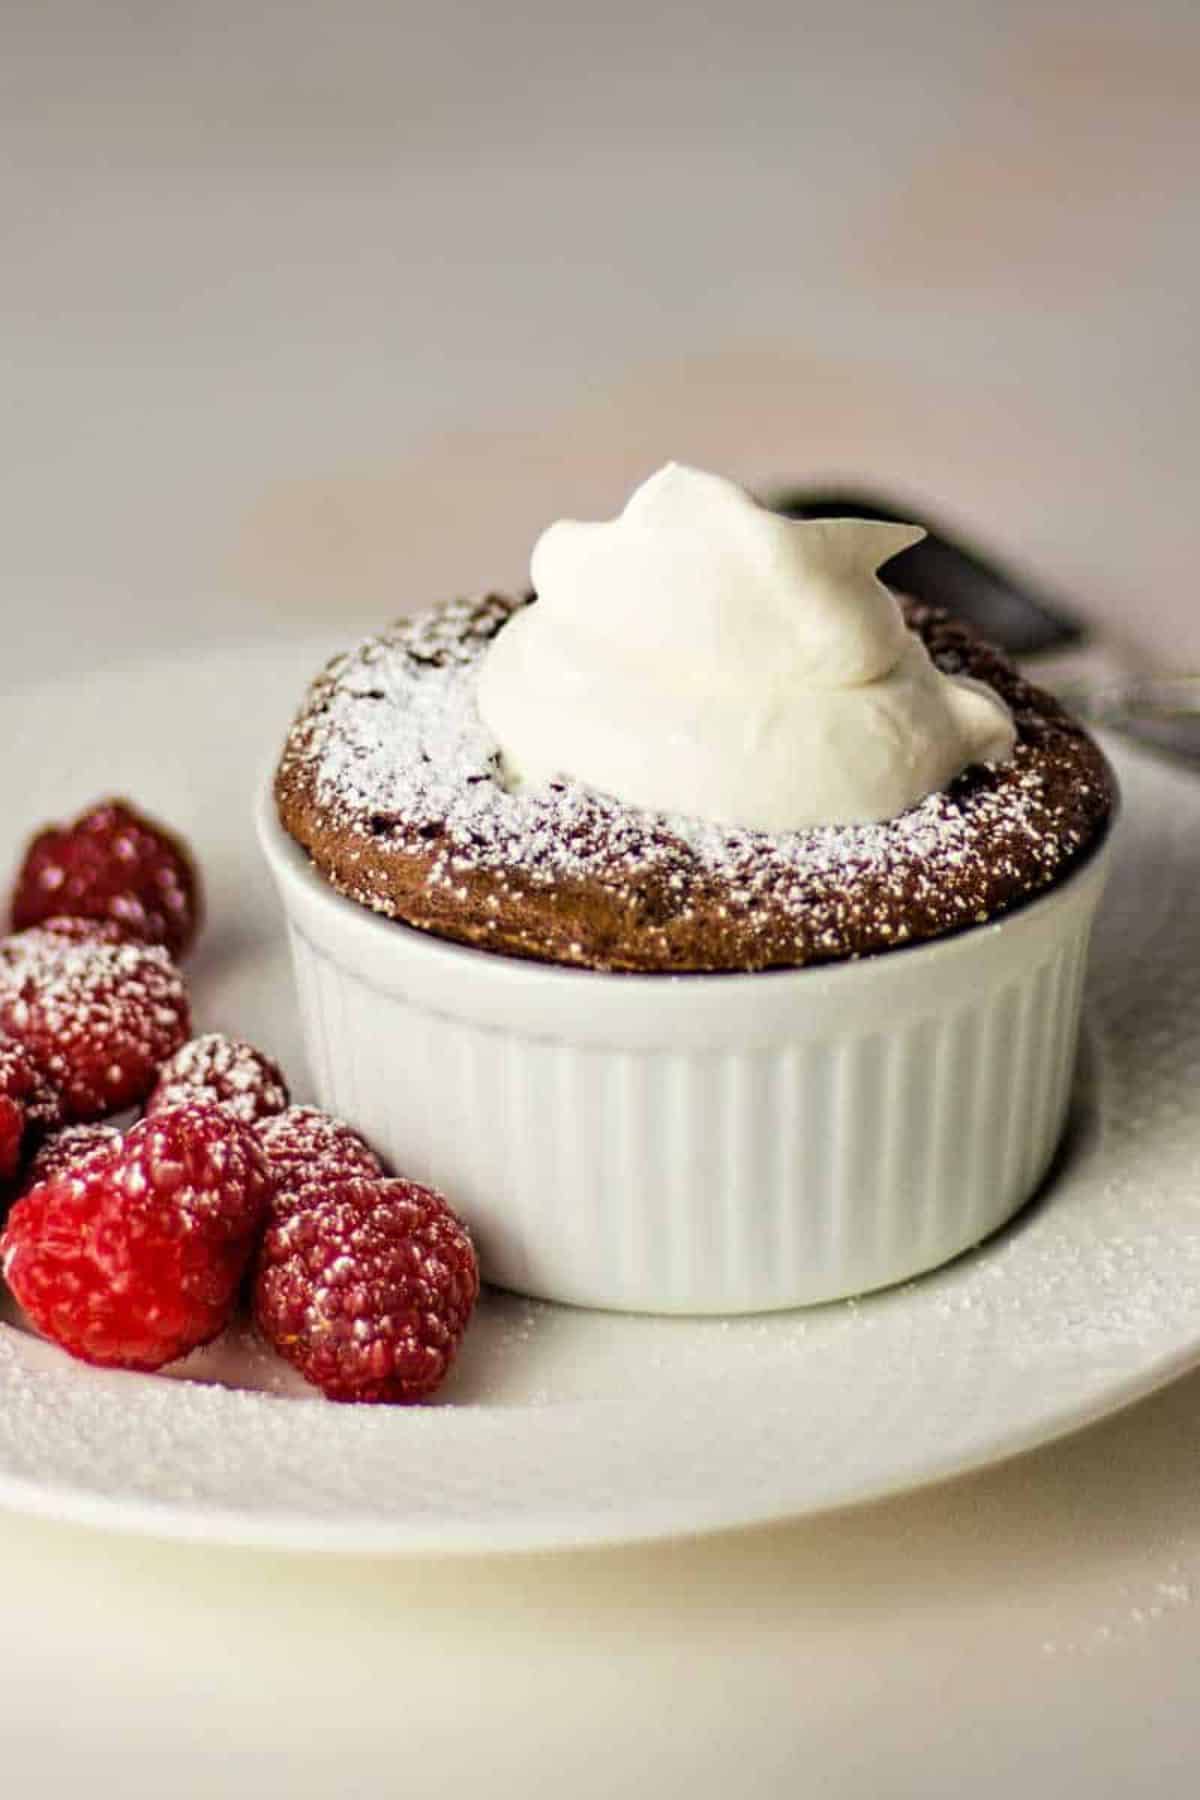 Scrumptious chocolate souffle cake in a small bowl on a plate.